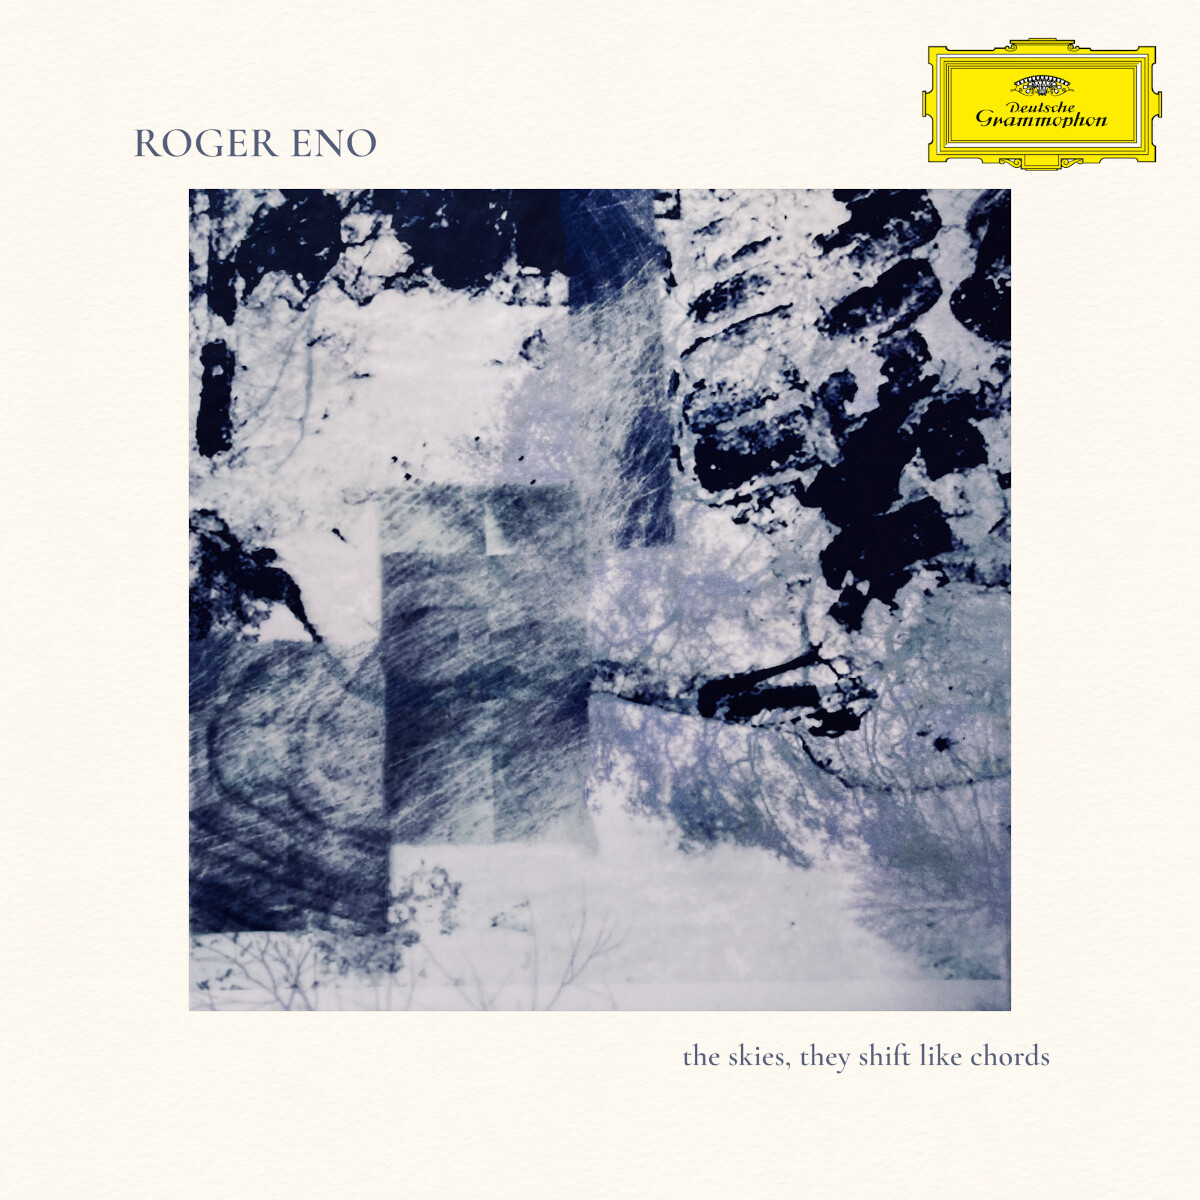 Roger Eno – The skies they shift like chords